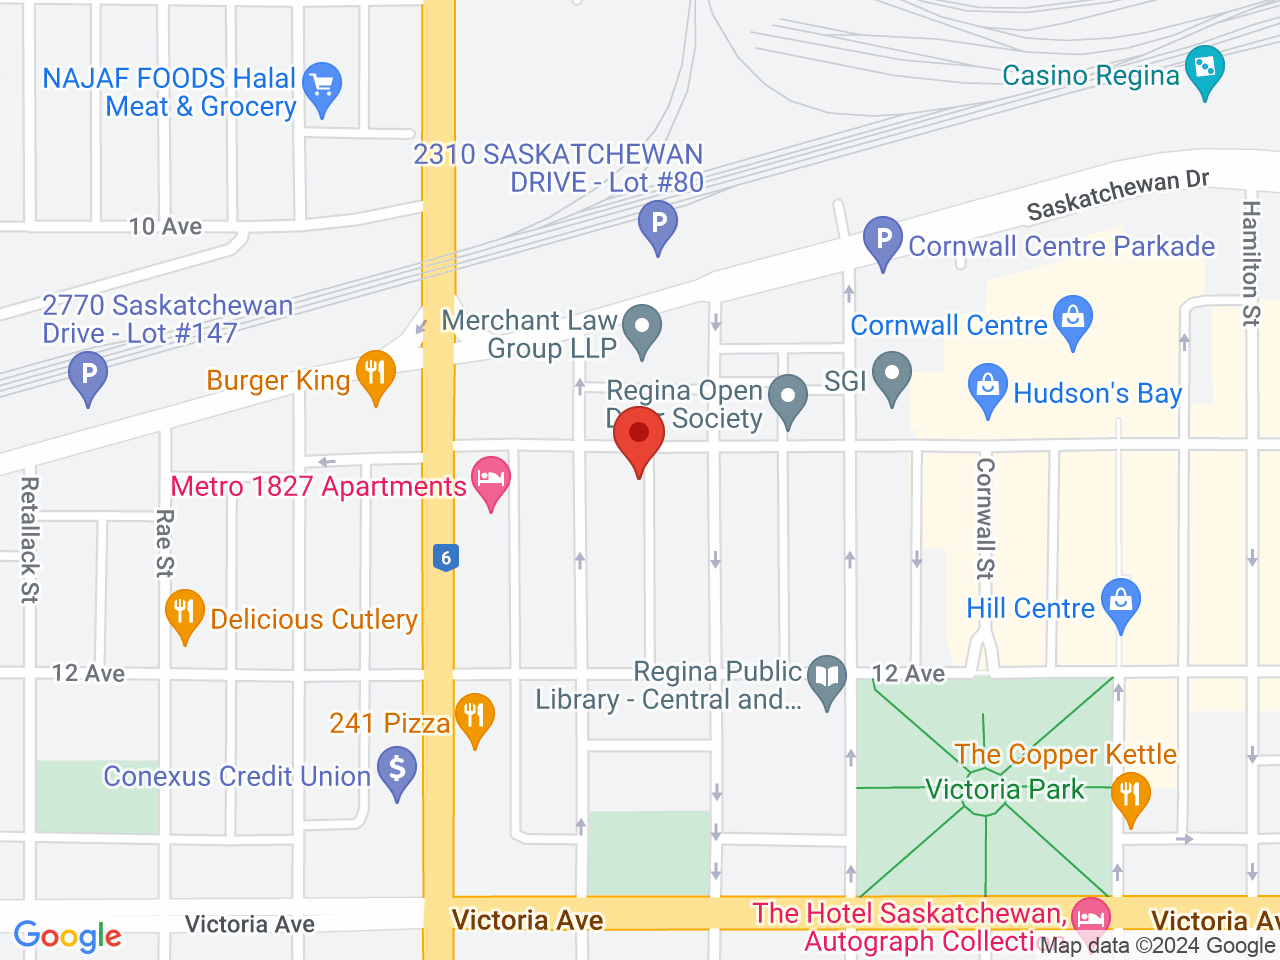 Street map for The Stash Spot Cannabis, 2425 11th Ave, Regina SK